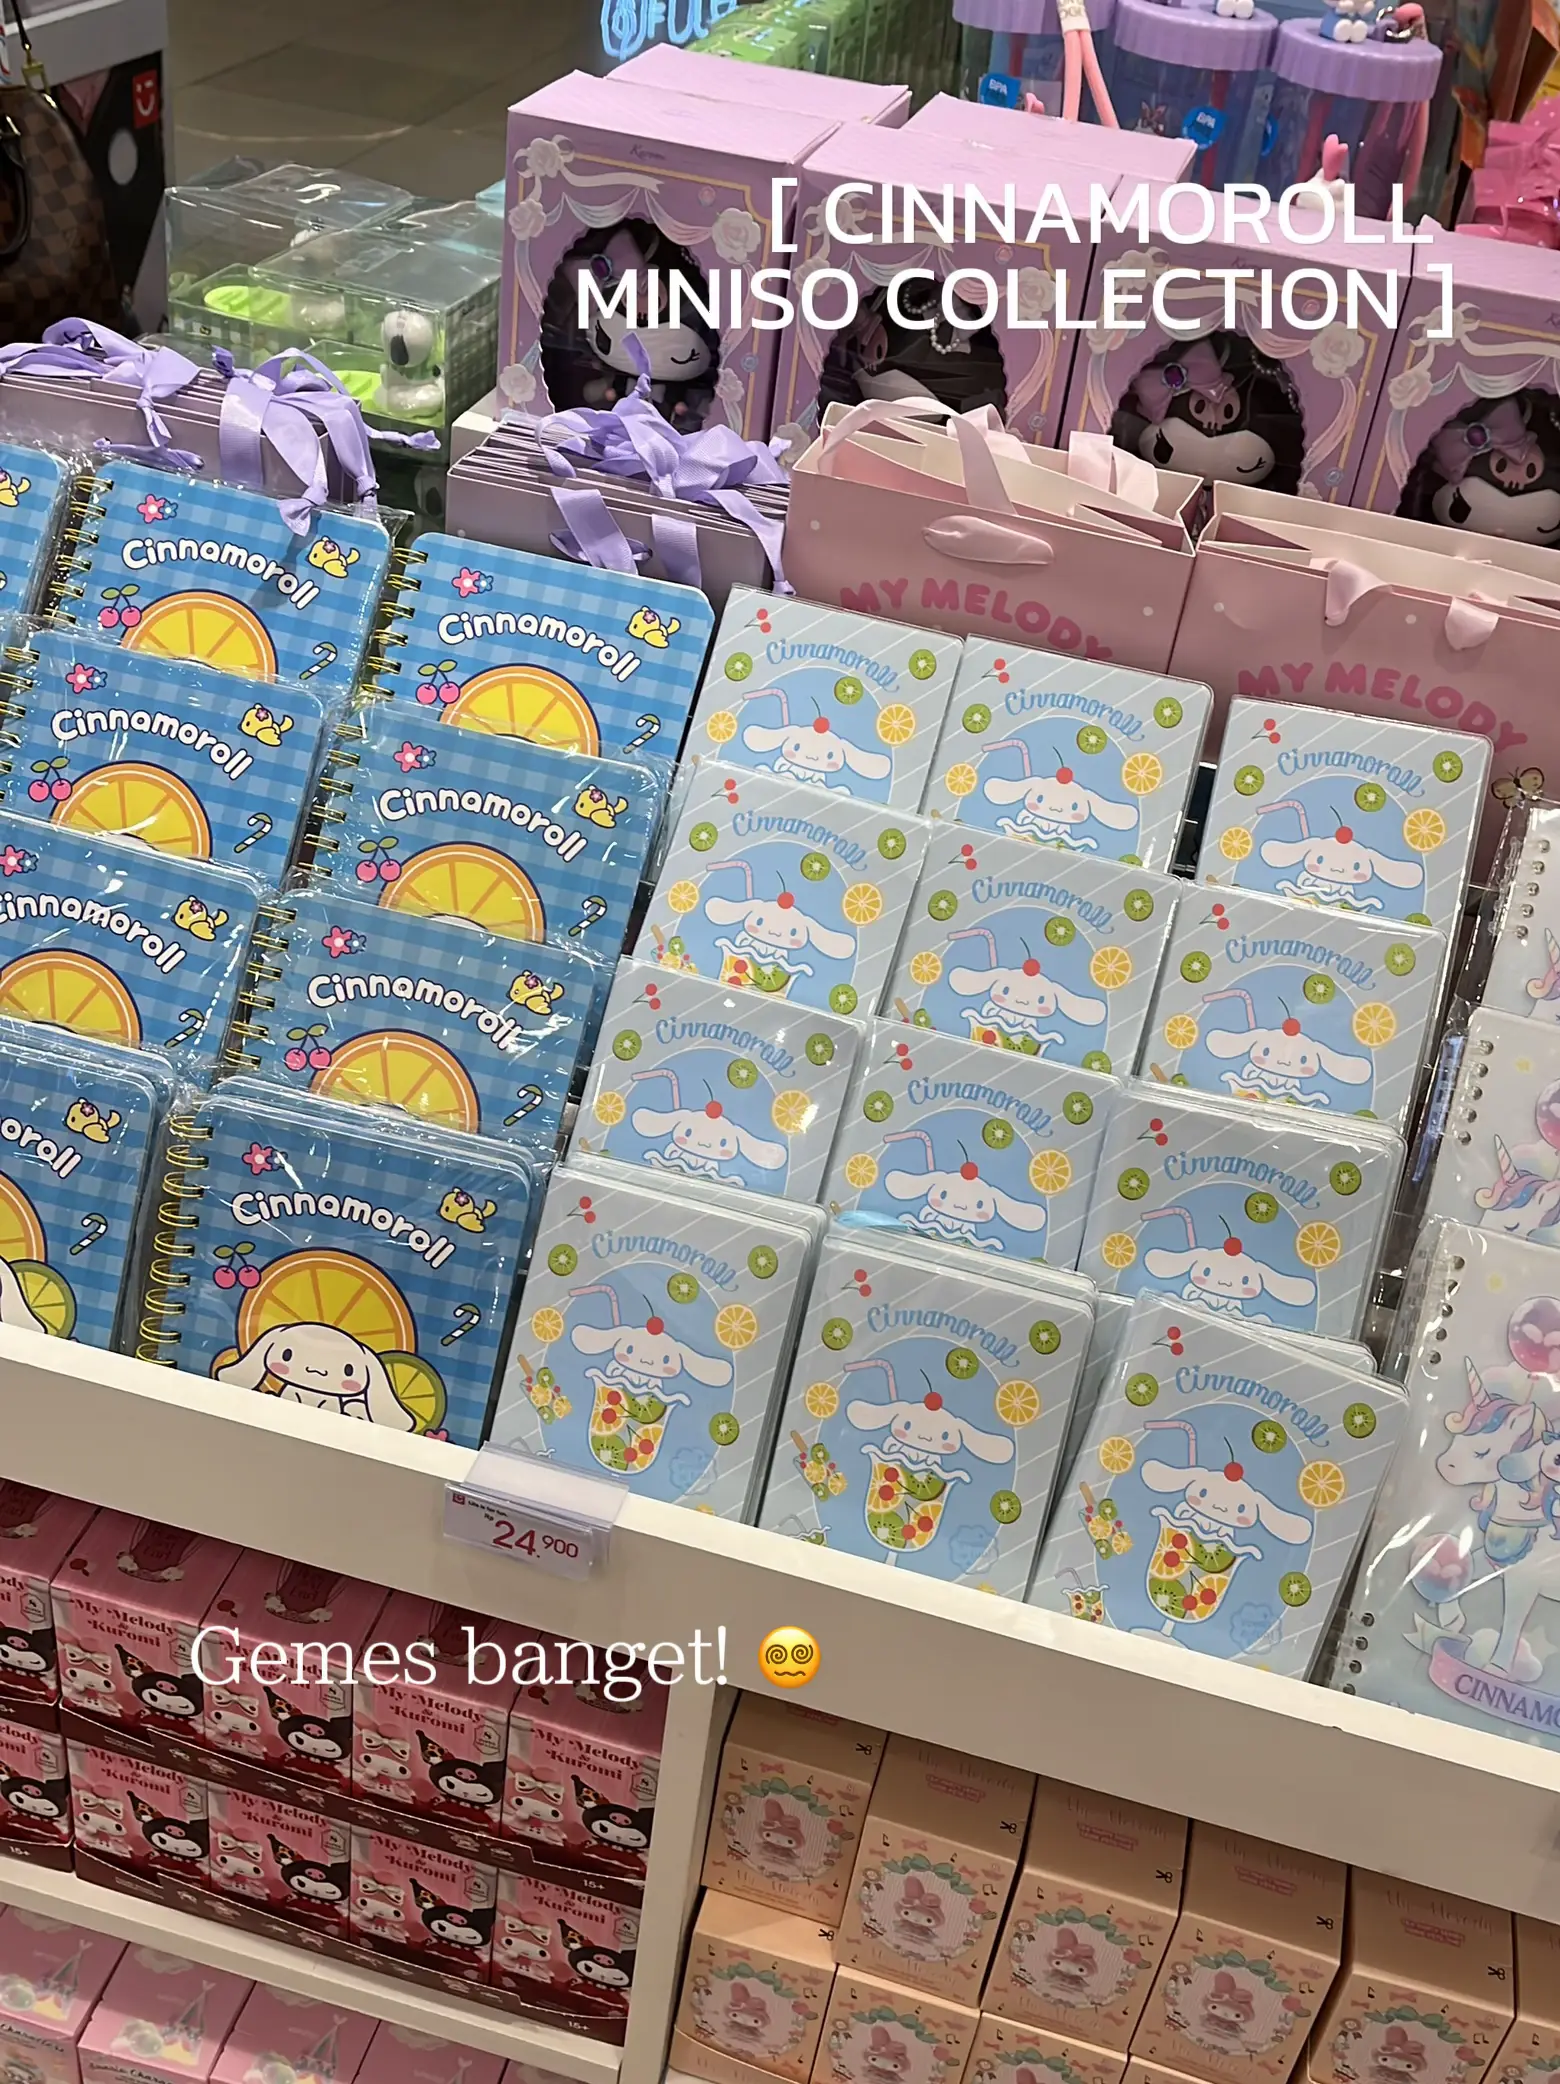 CINNAMOROLL MINISO COLLECTION, Gallery posted by jophineeclau